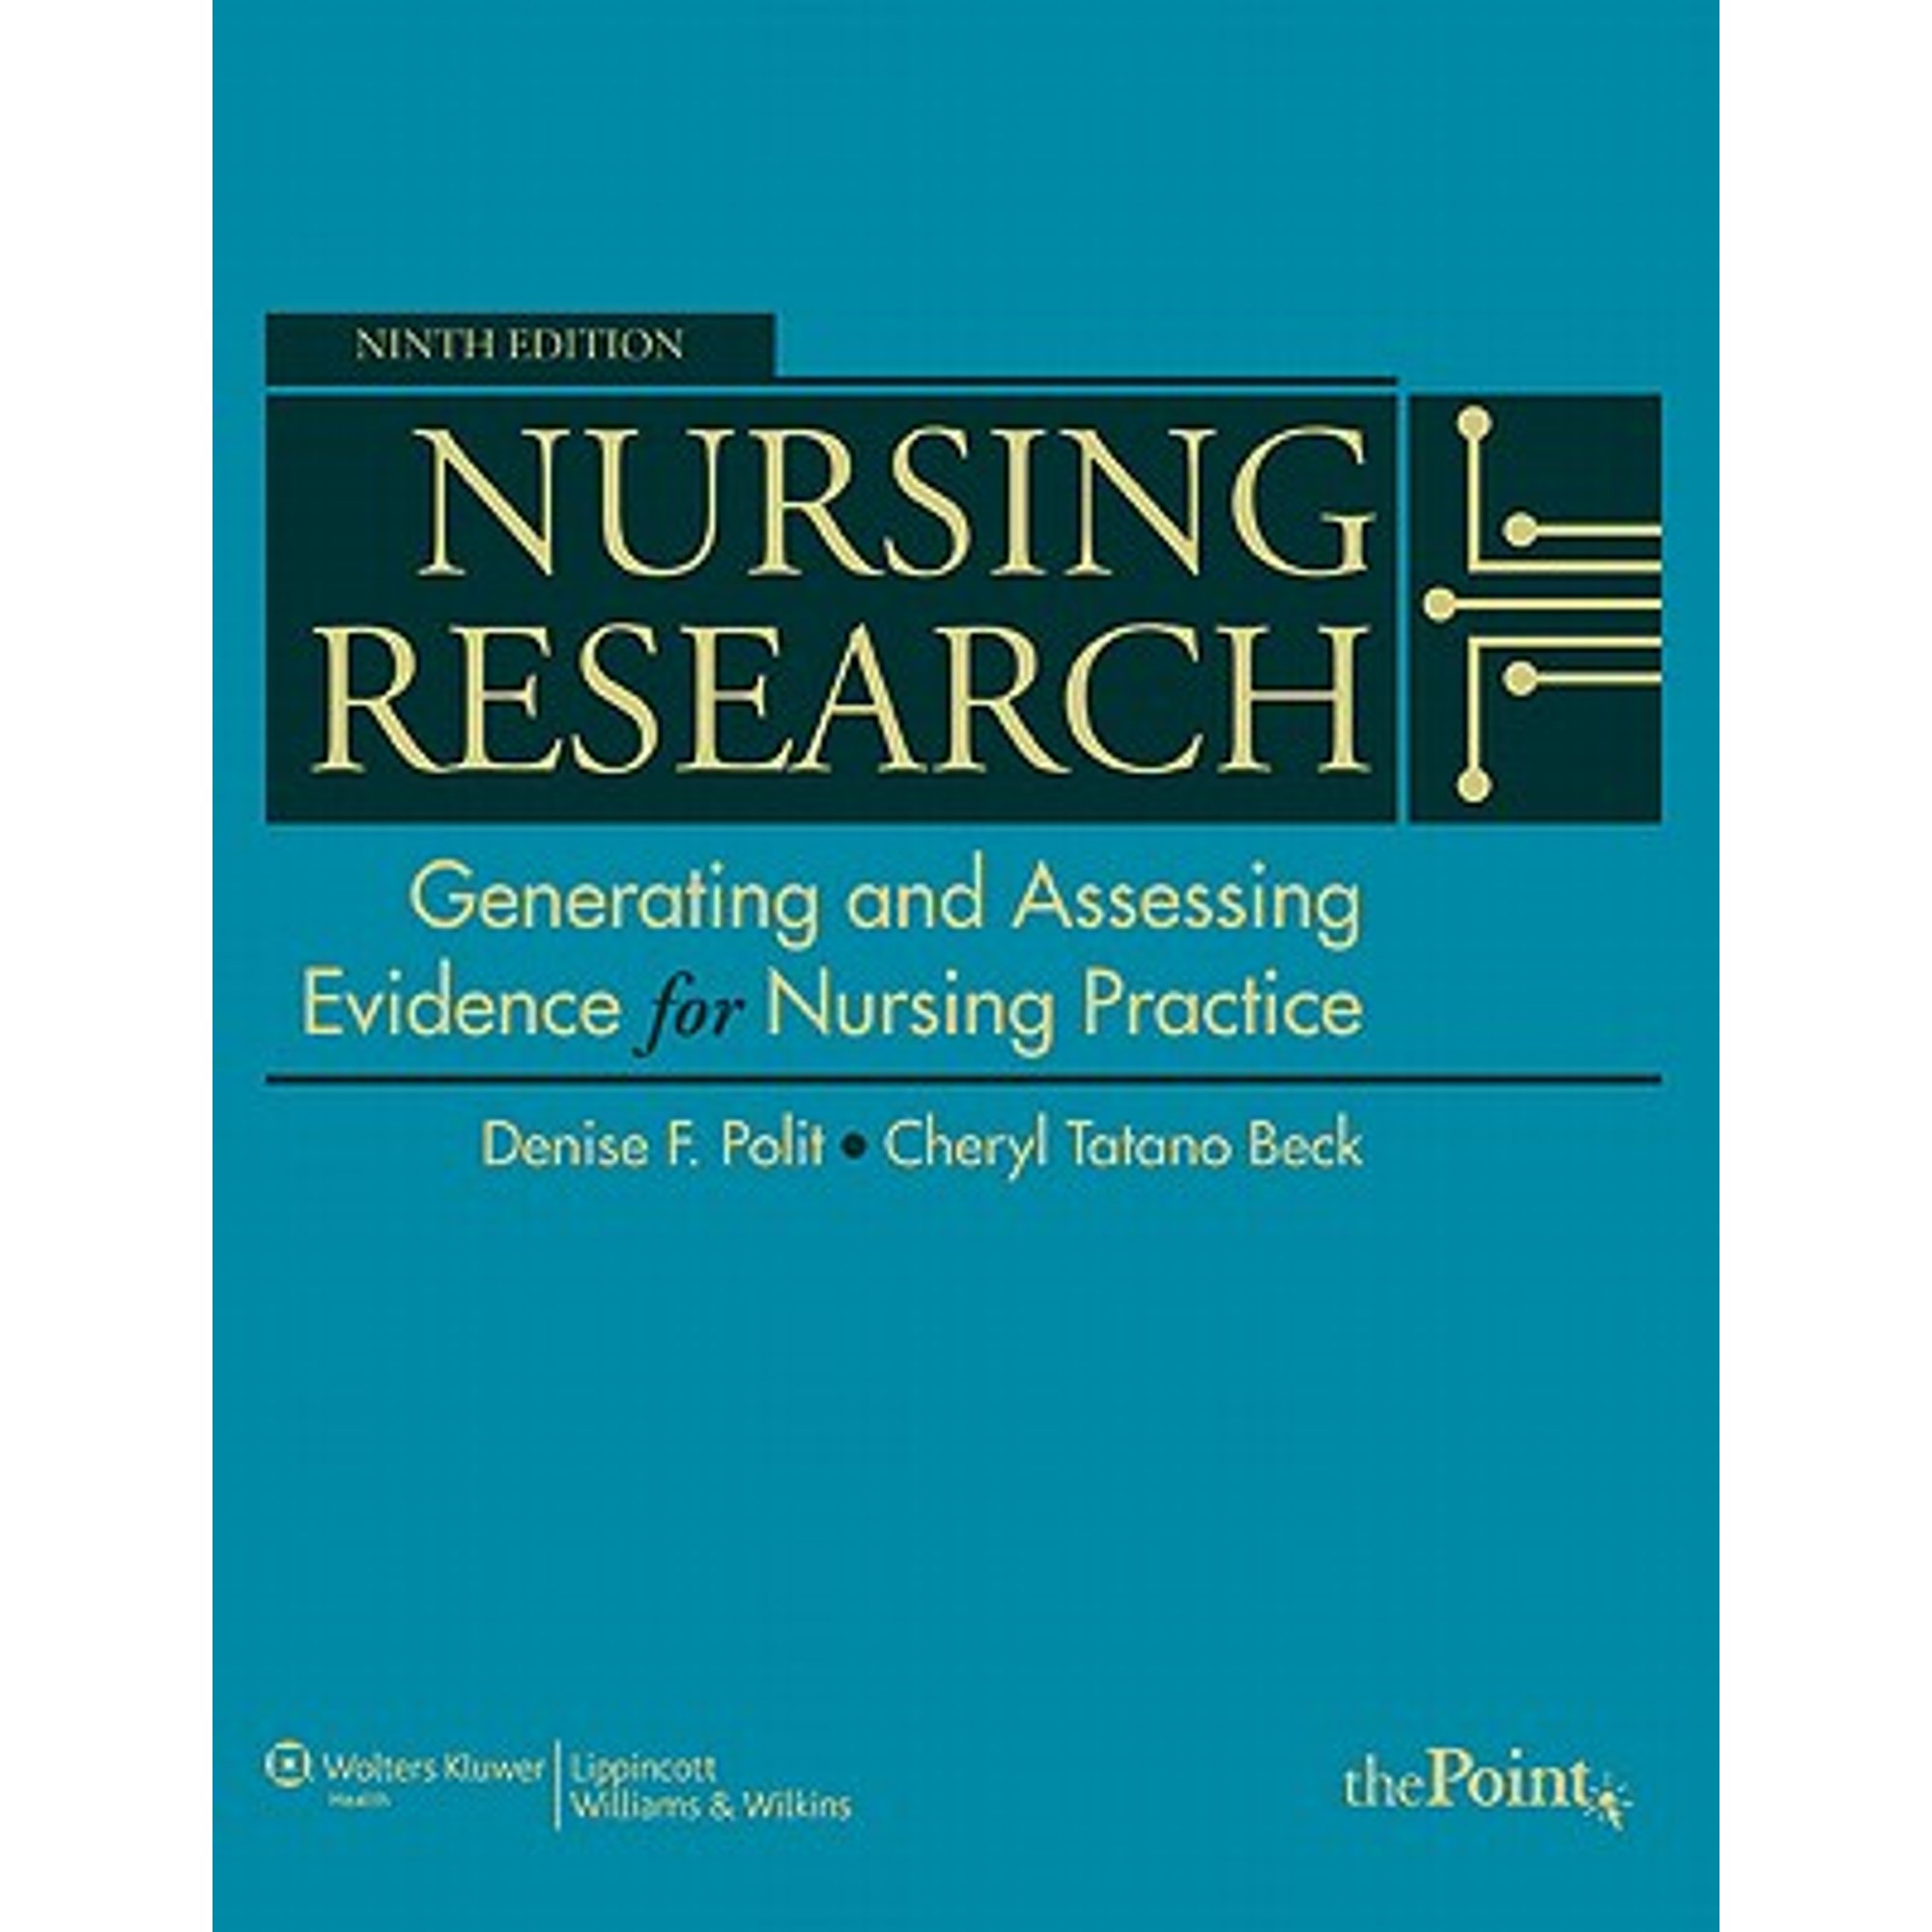 Nursing　Tatano　for　Evidence　Denise　F　Generating　Cheryl　and　Pre-Owned　Polit,　by　Practice　9781605477084)　Nursing　(Hardcover　Assessing　Research:　Beck